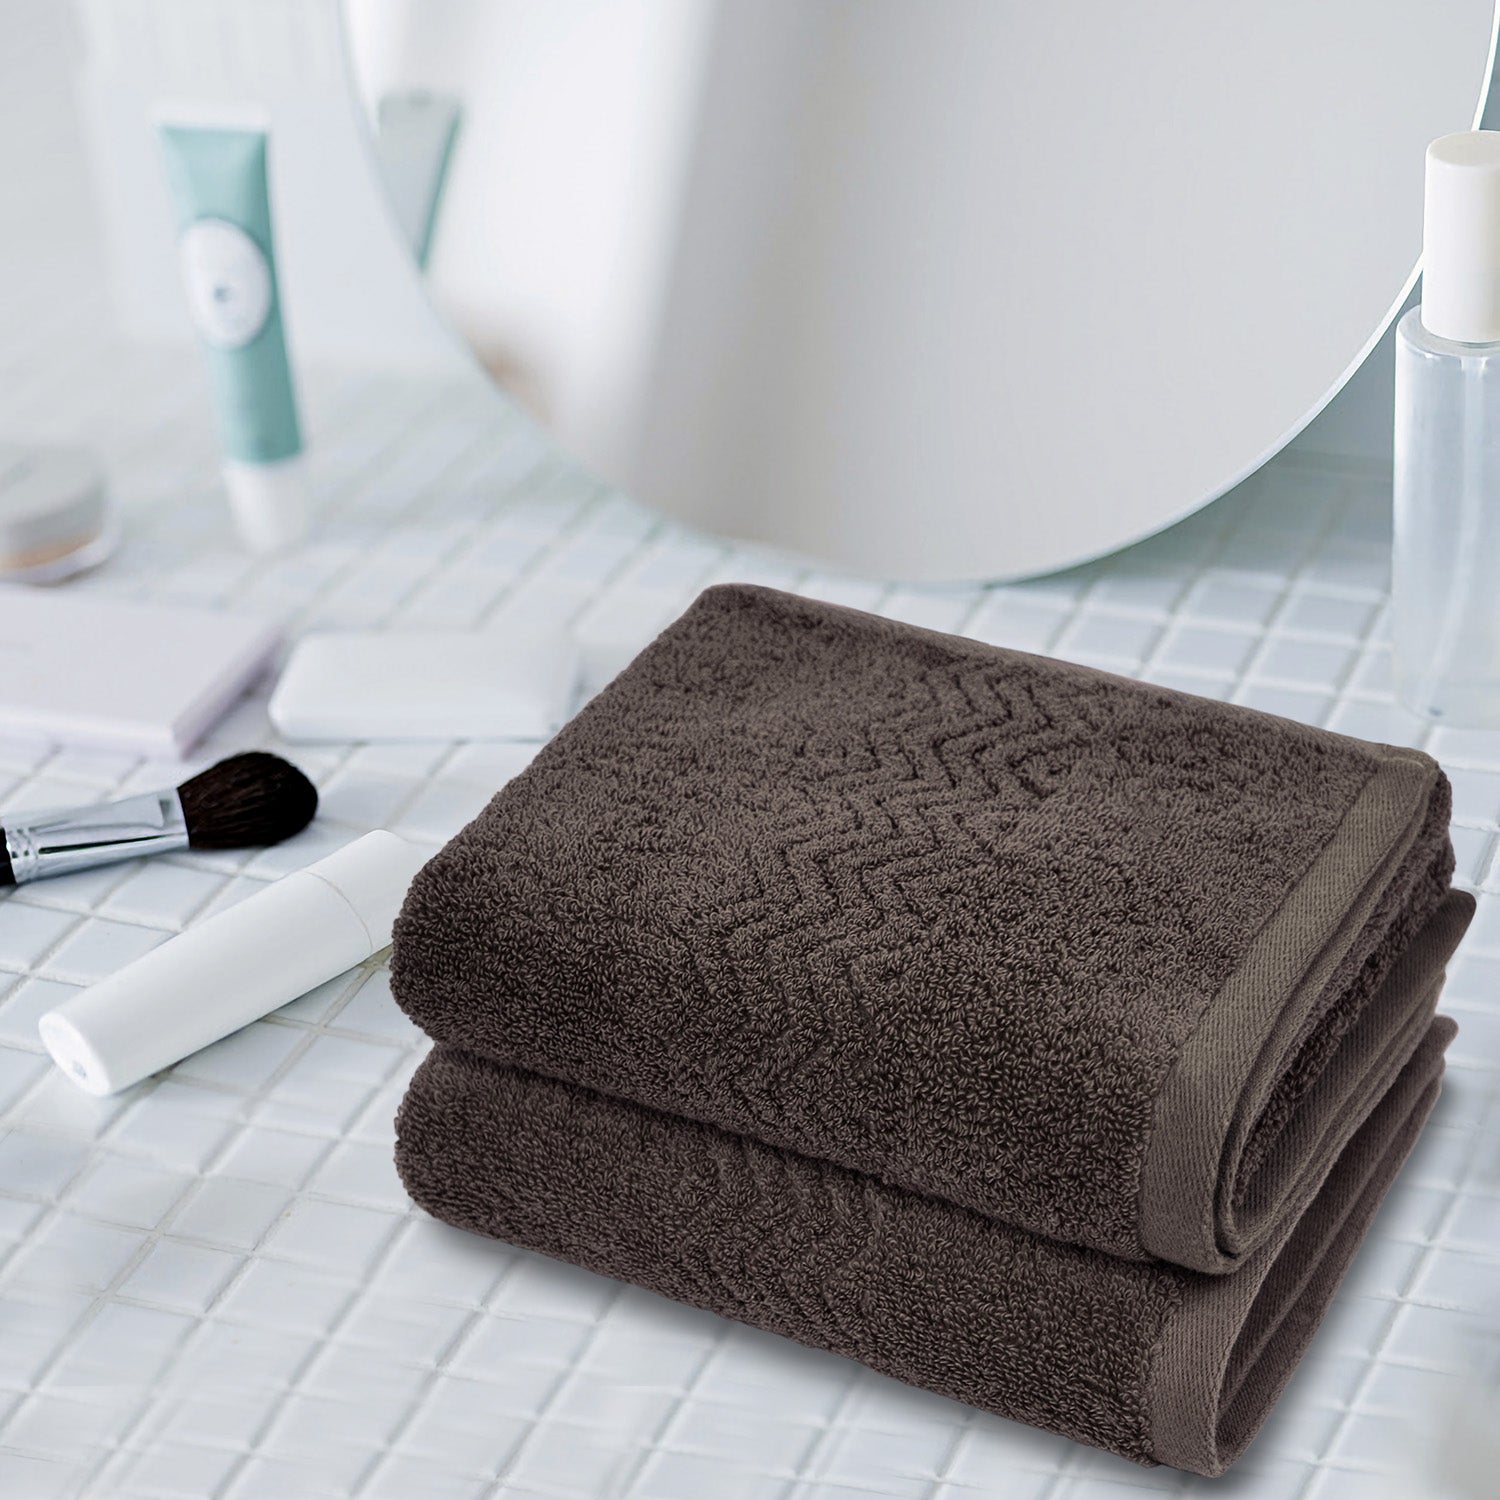 Cleanbear 100% Cotton Hand Towels, Highly Absorbent, 13 x 28 Inches